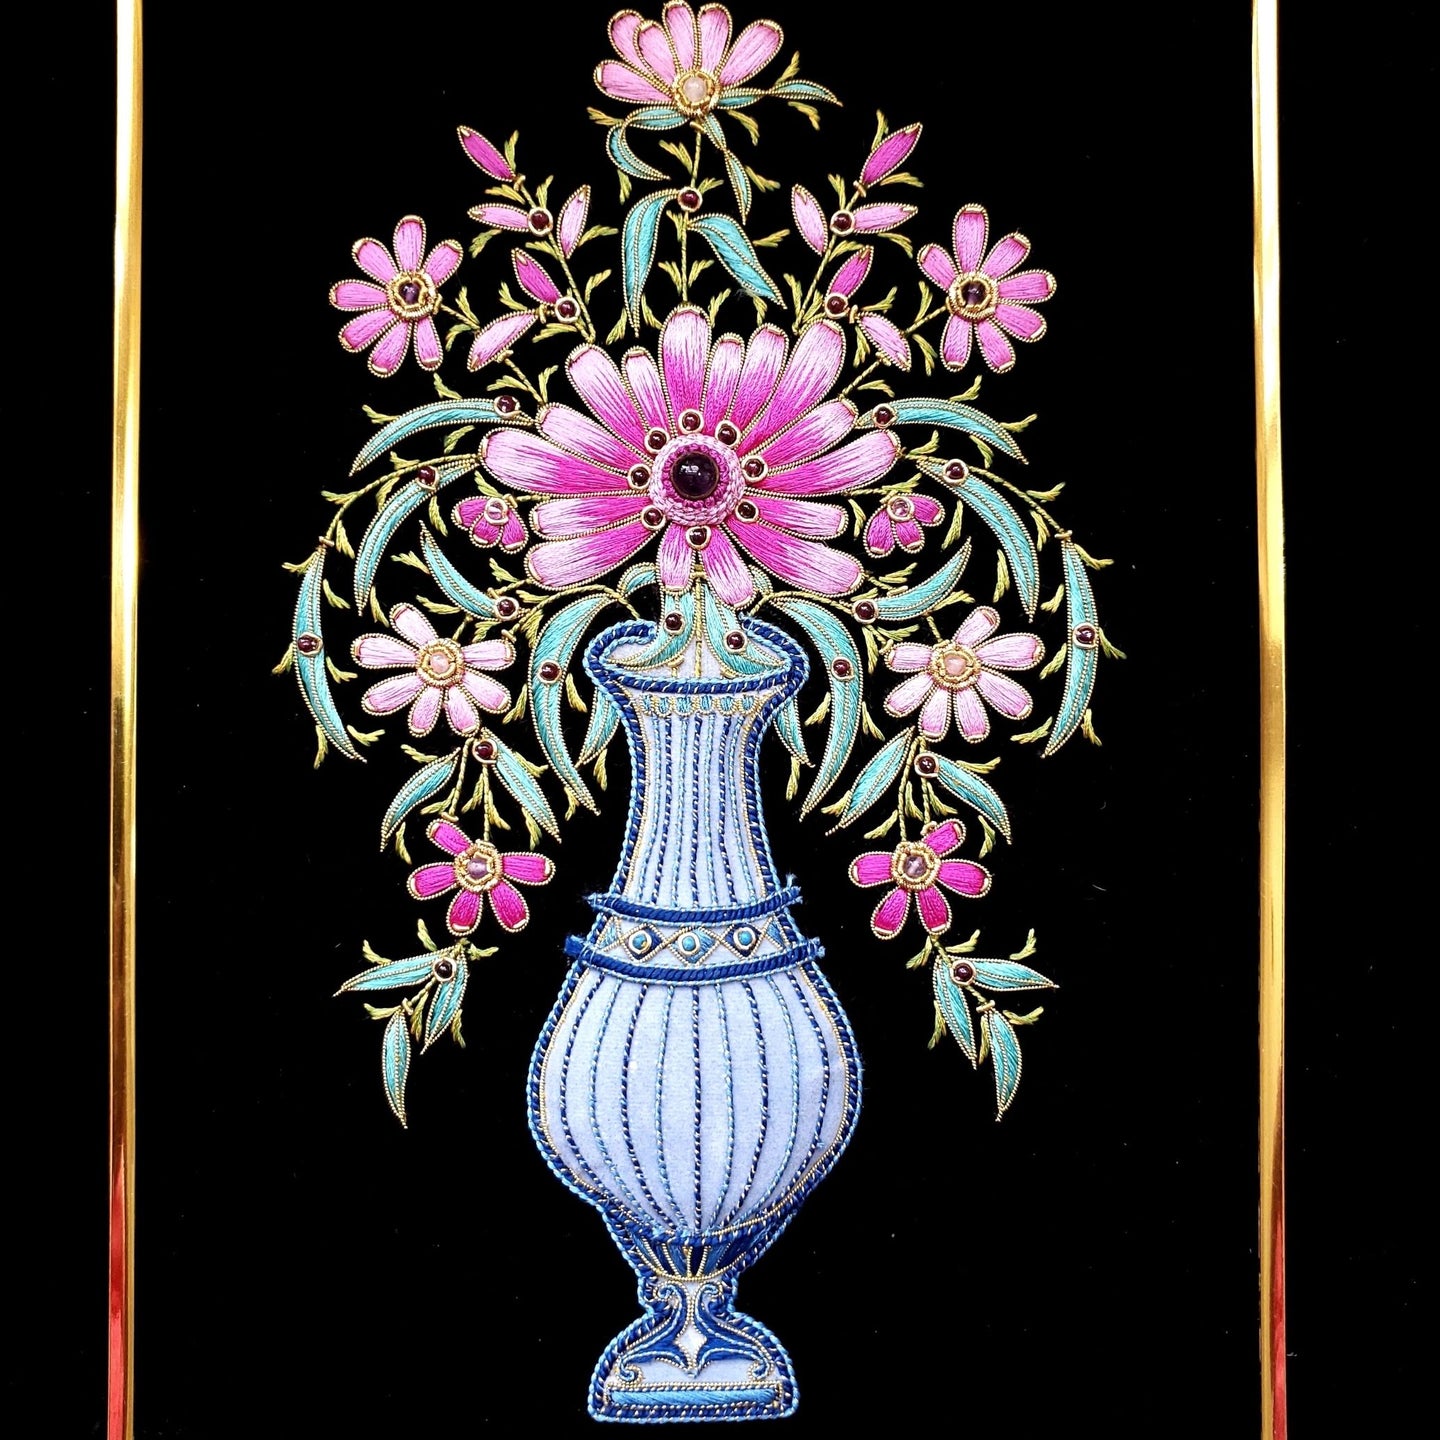 Hand embroidered pink silk flowers in blue flower vase, with amethyst cabochon. 